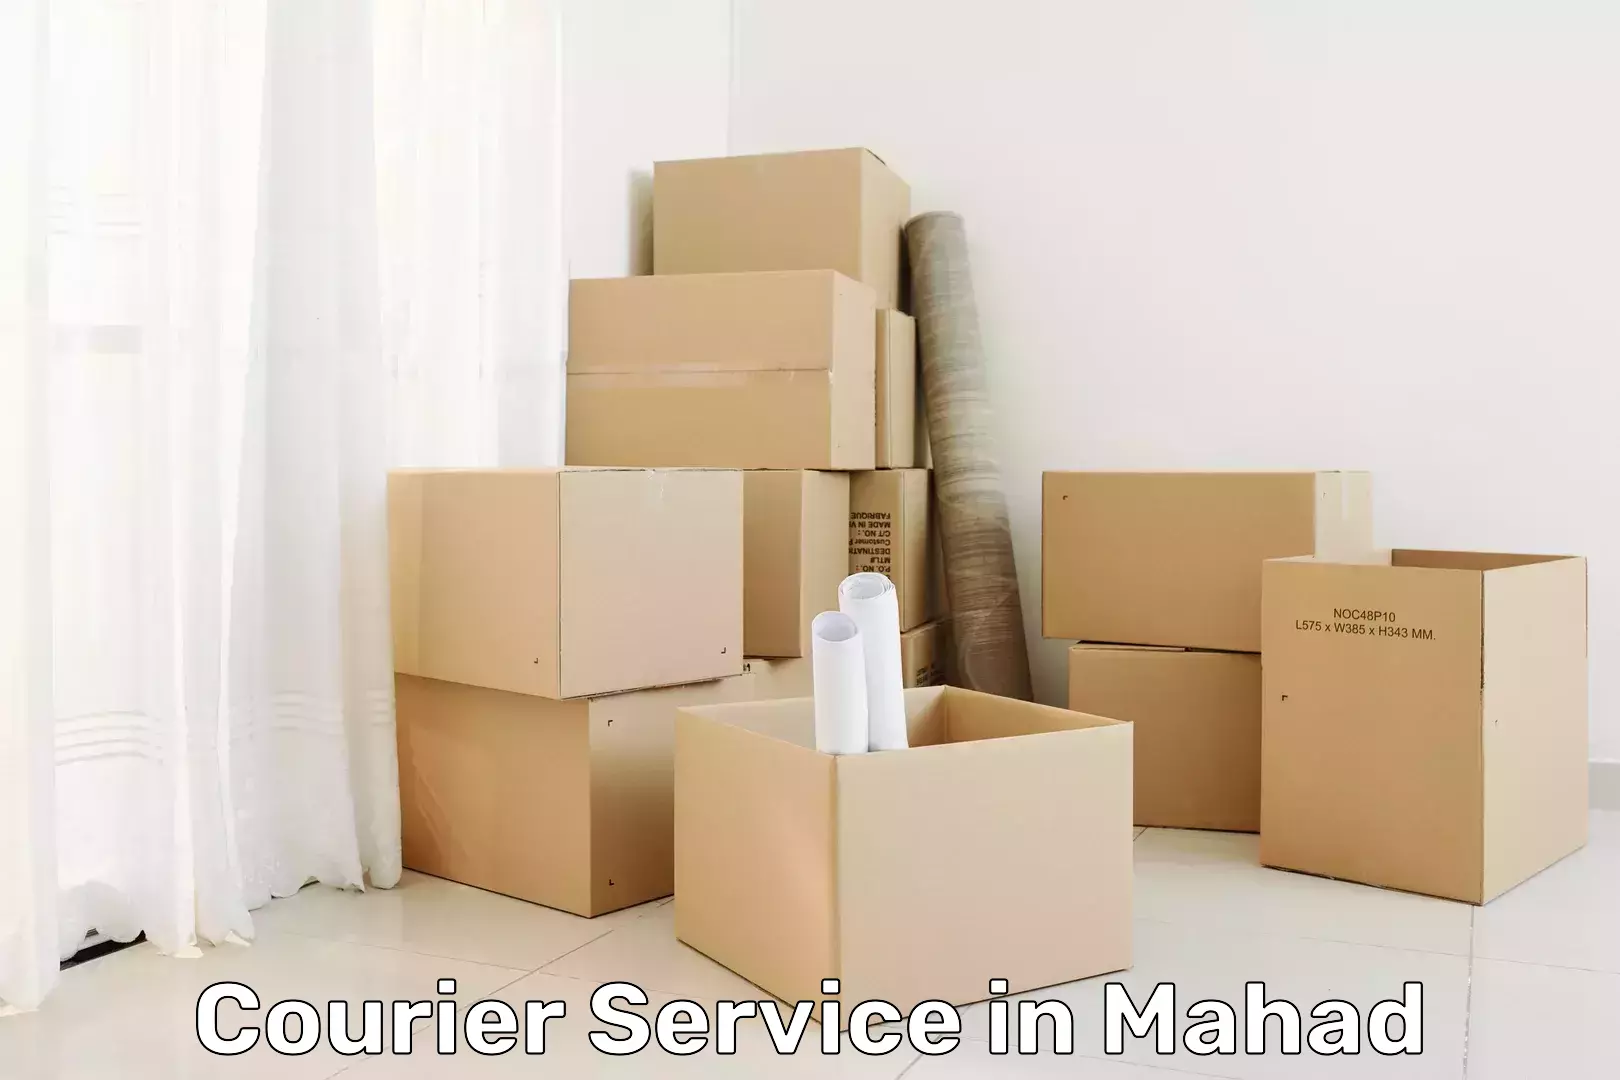 Flexible parcel services in Mahad